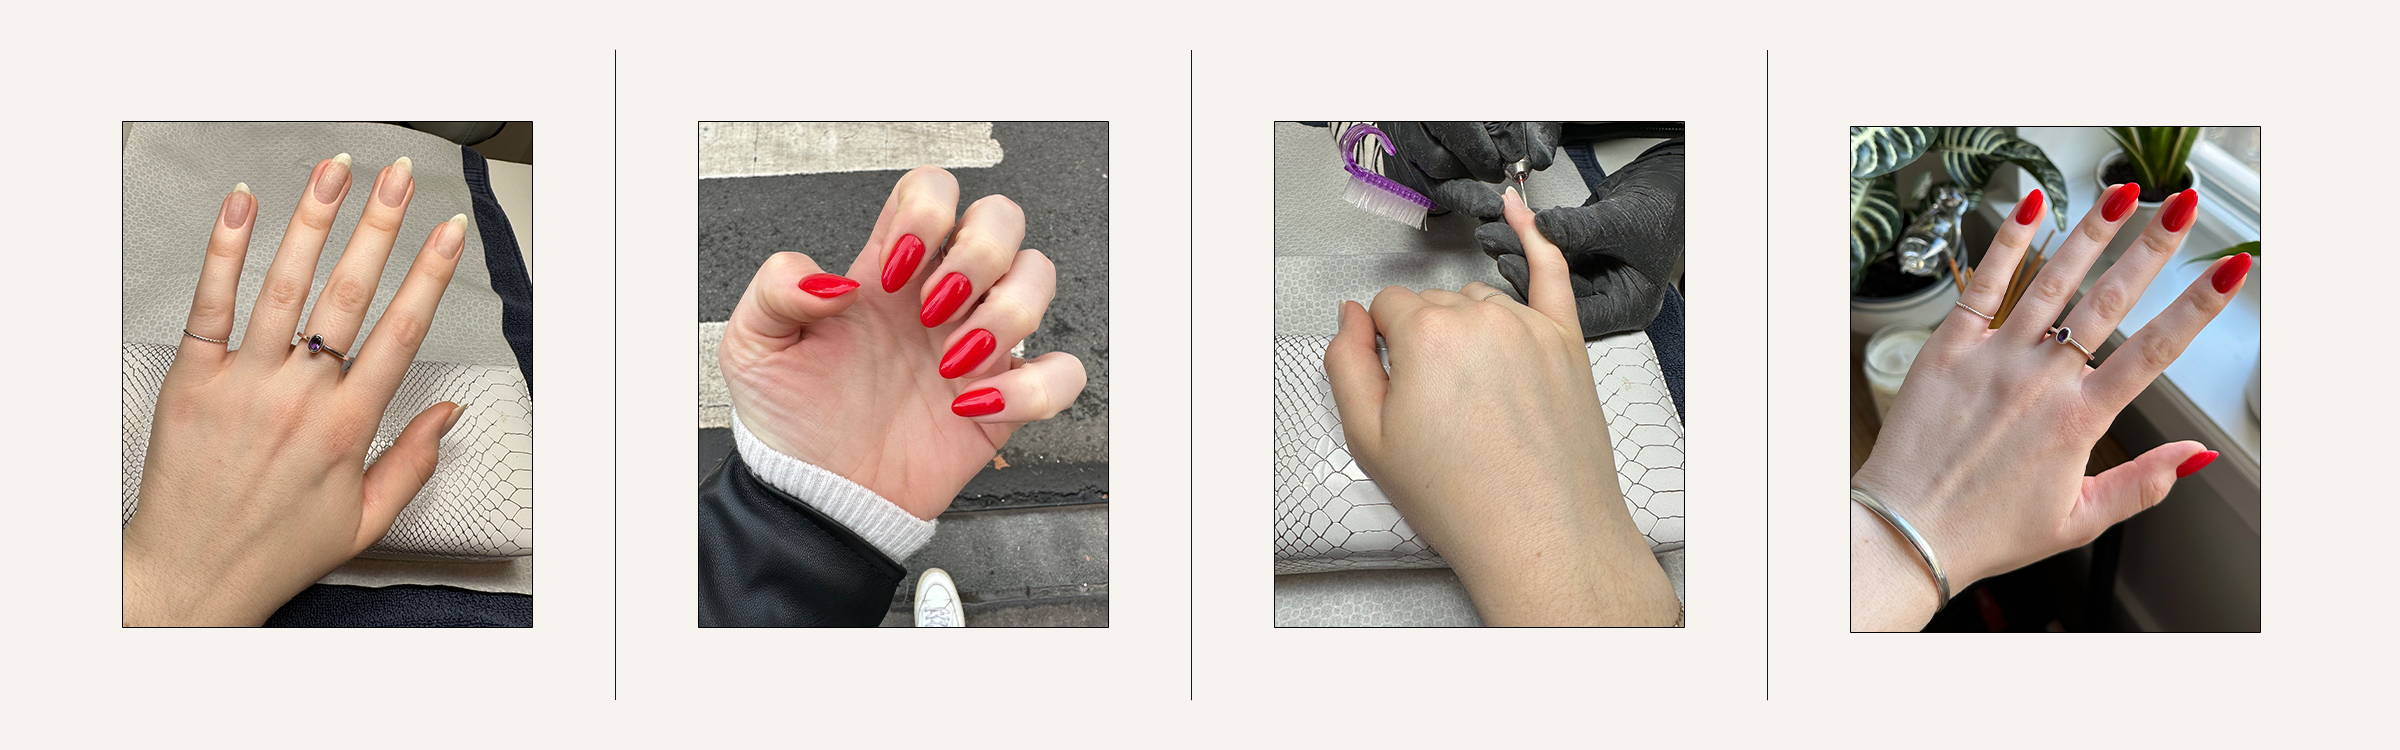 I Tried the Controversial Manicure Taking Over TikTok—My Nails Look Unreal